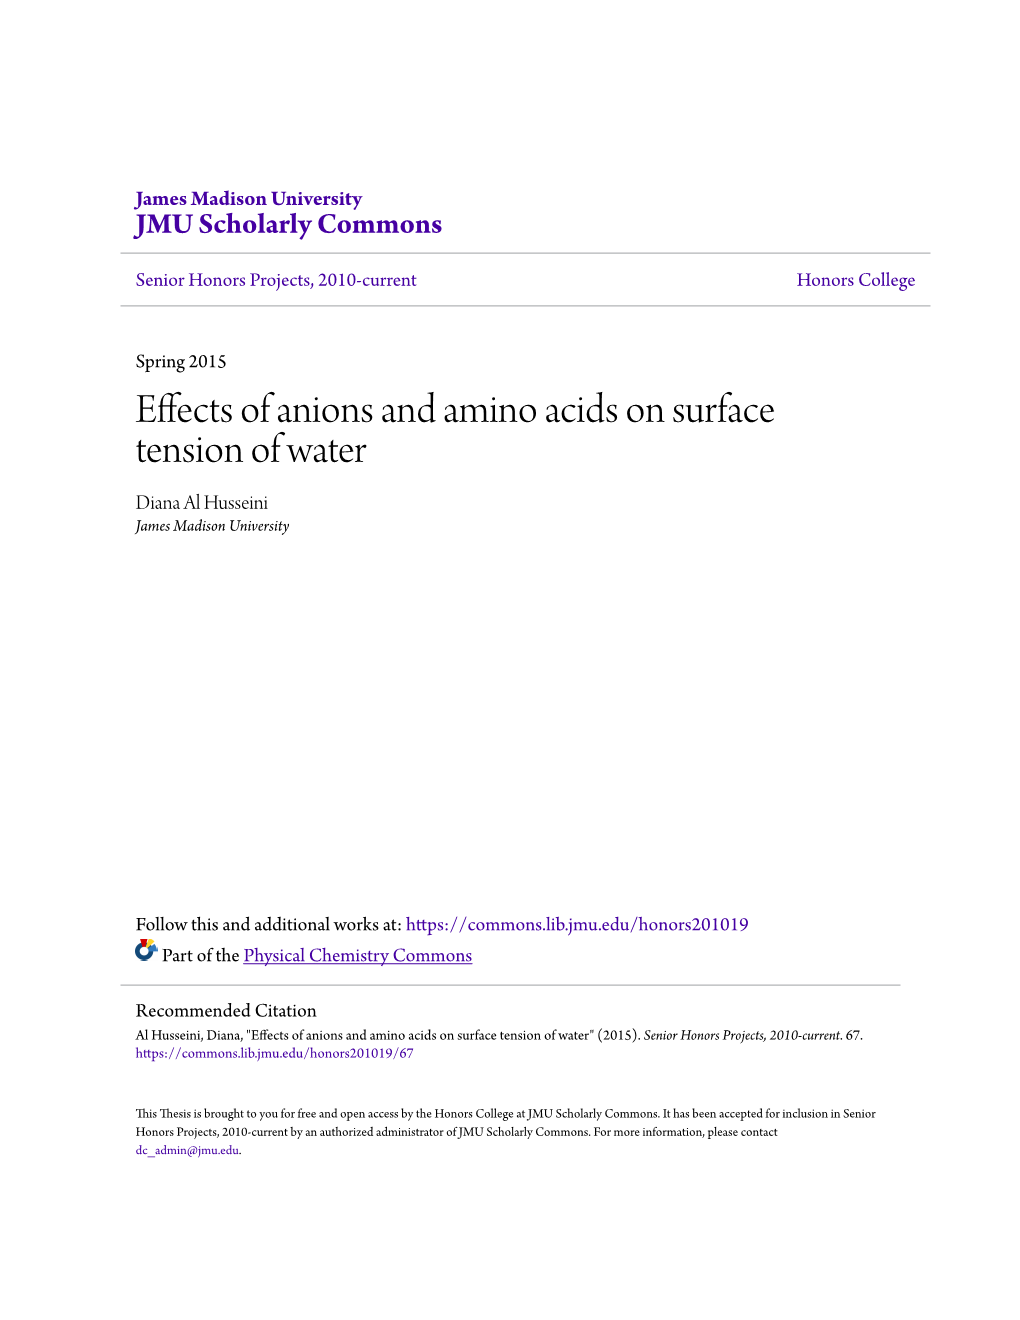 Effects of Anions and Amino Acids on Surface Tension of Water Diana Al Husseini James Madison University